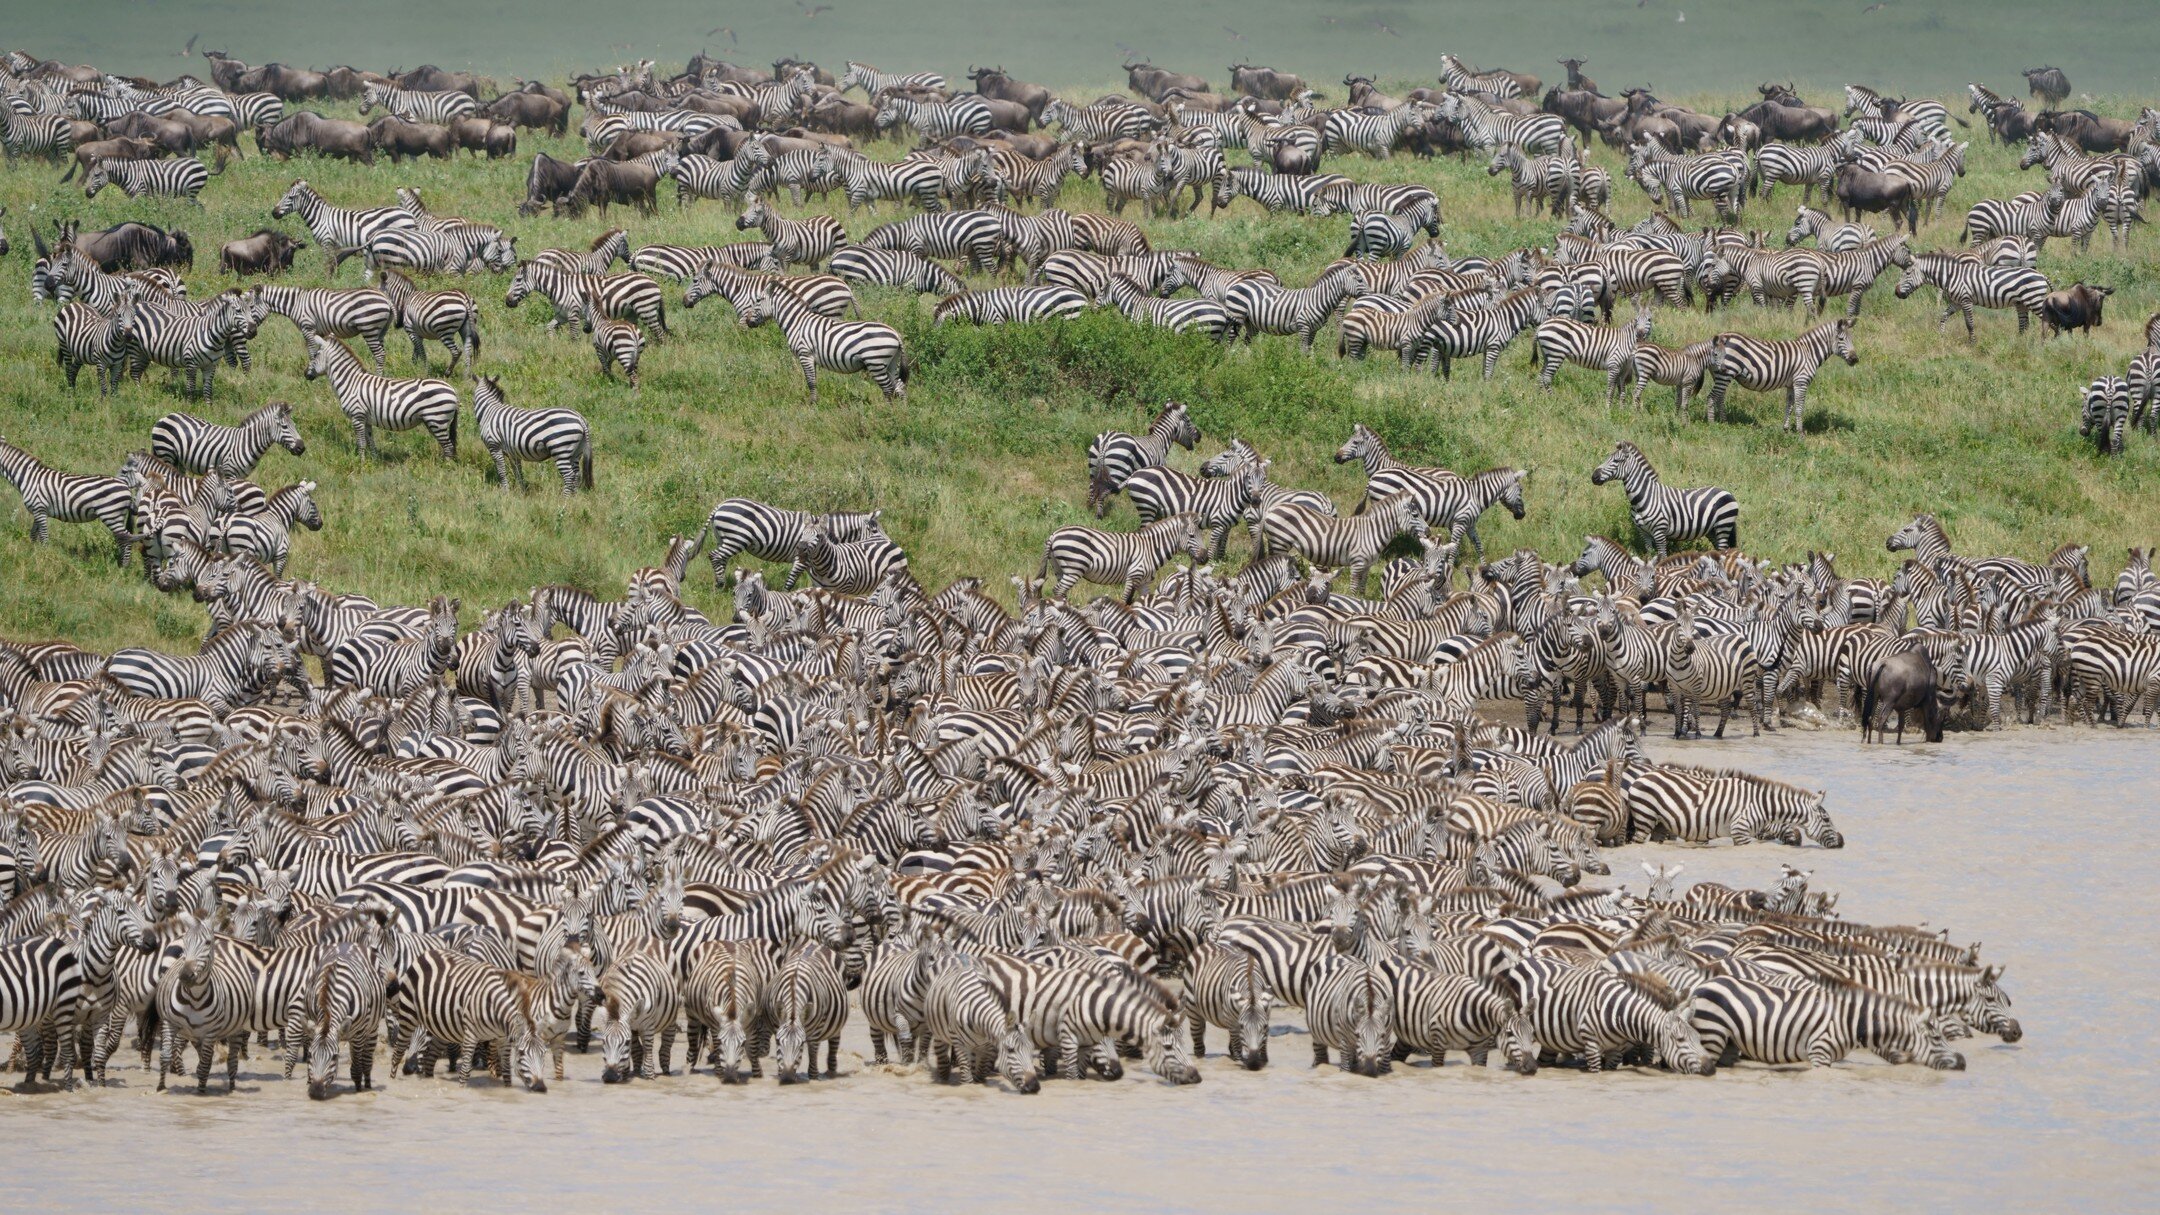 March zebra migration! Thanks to Harold for sharing this image from his safari with Isack Msuya! #zebra #migration #tanzania